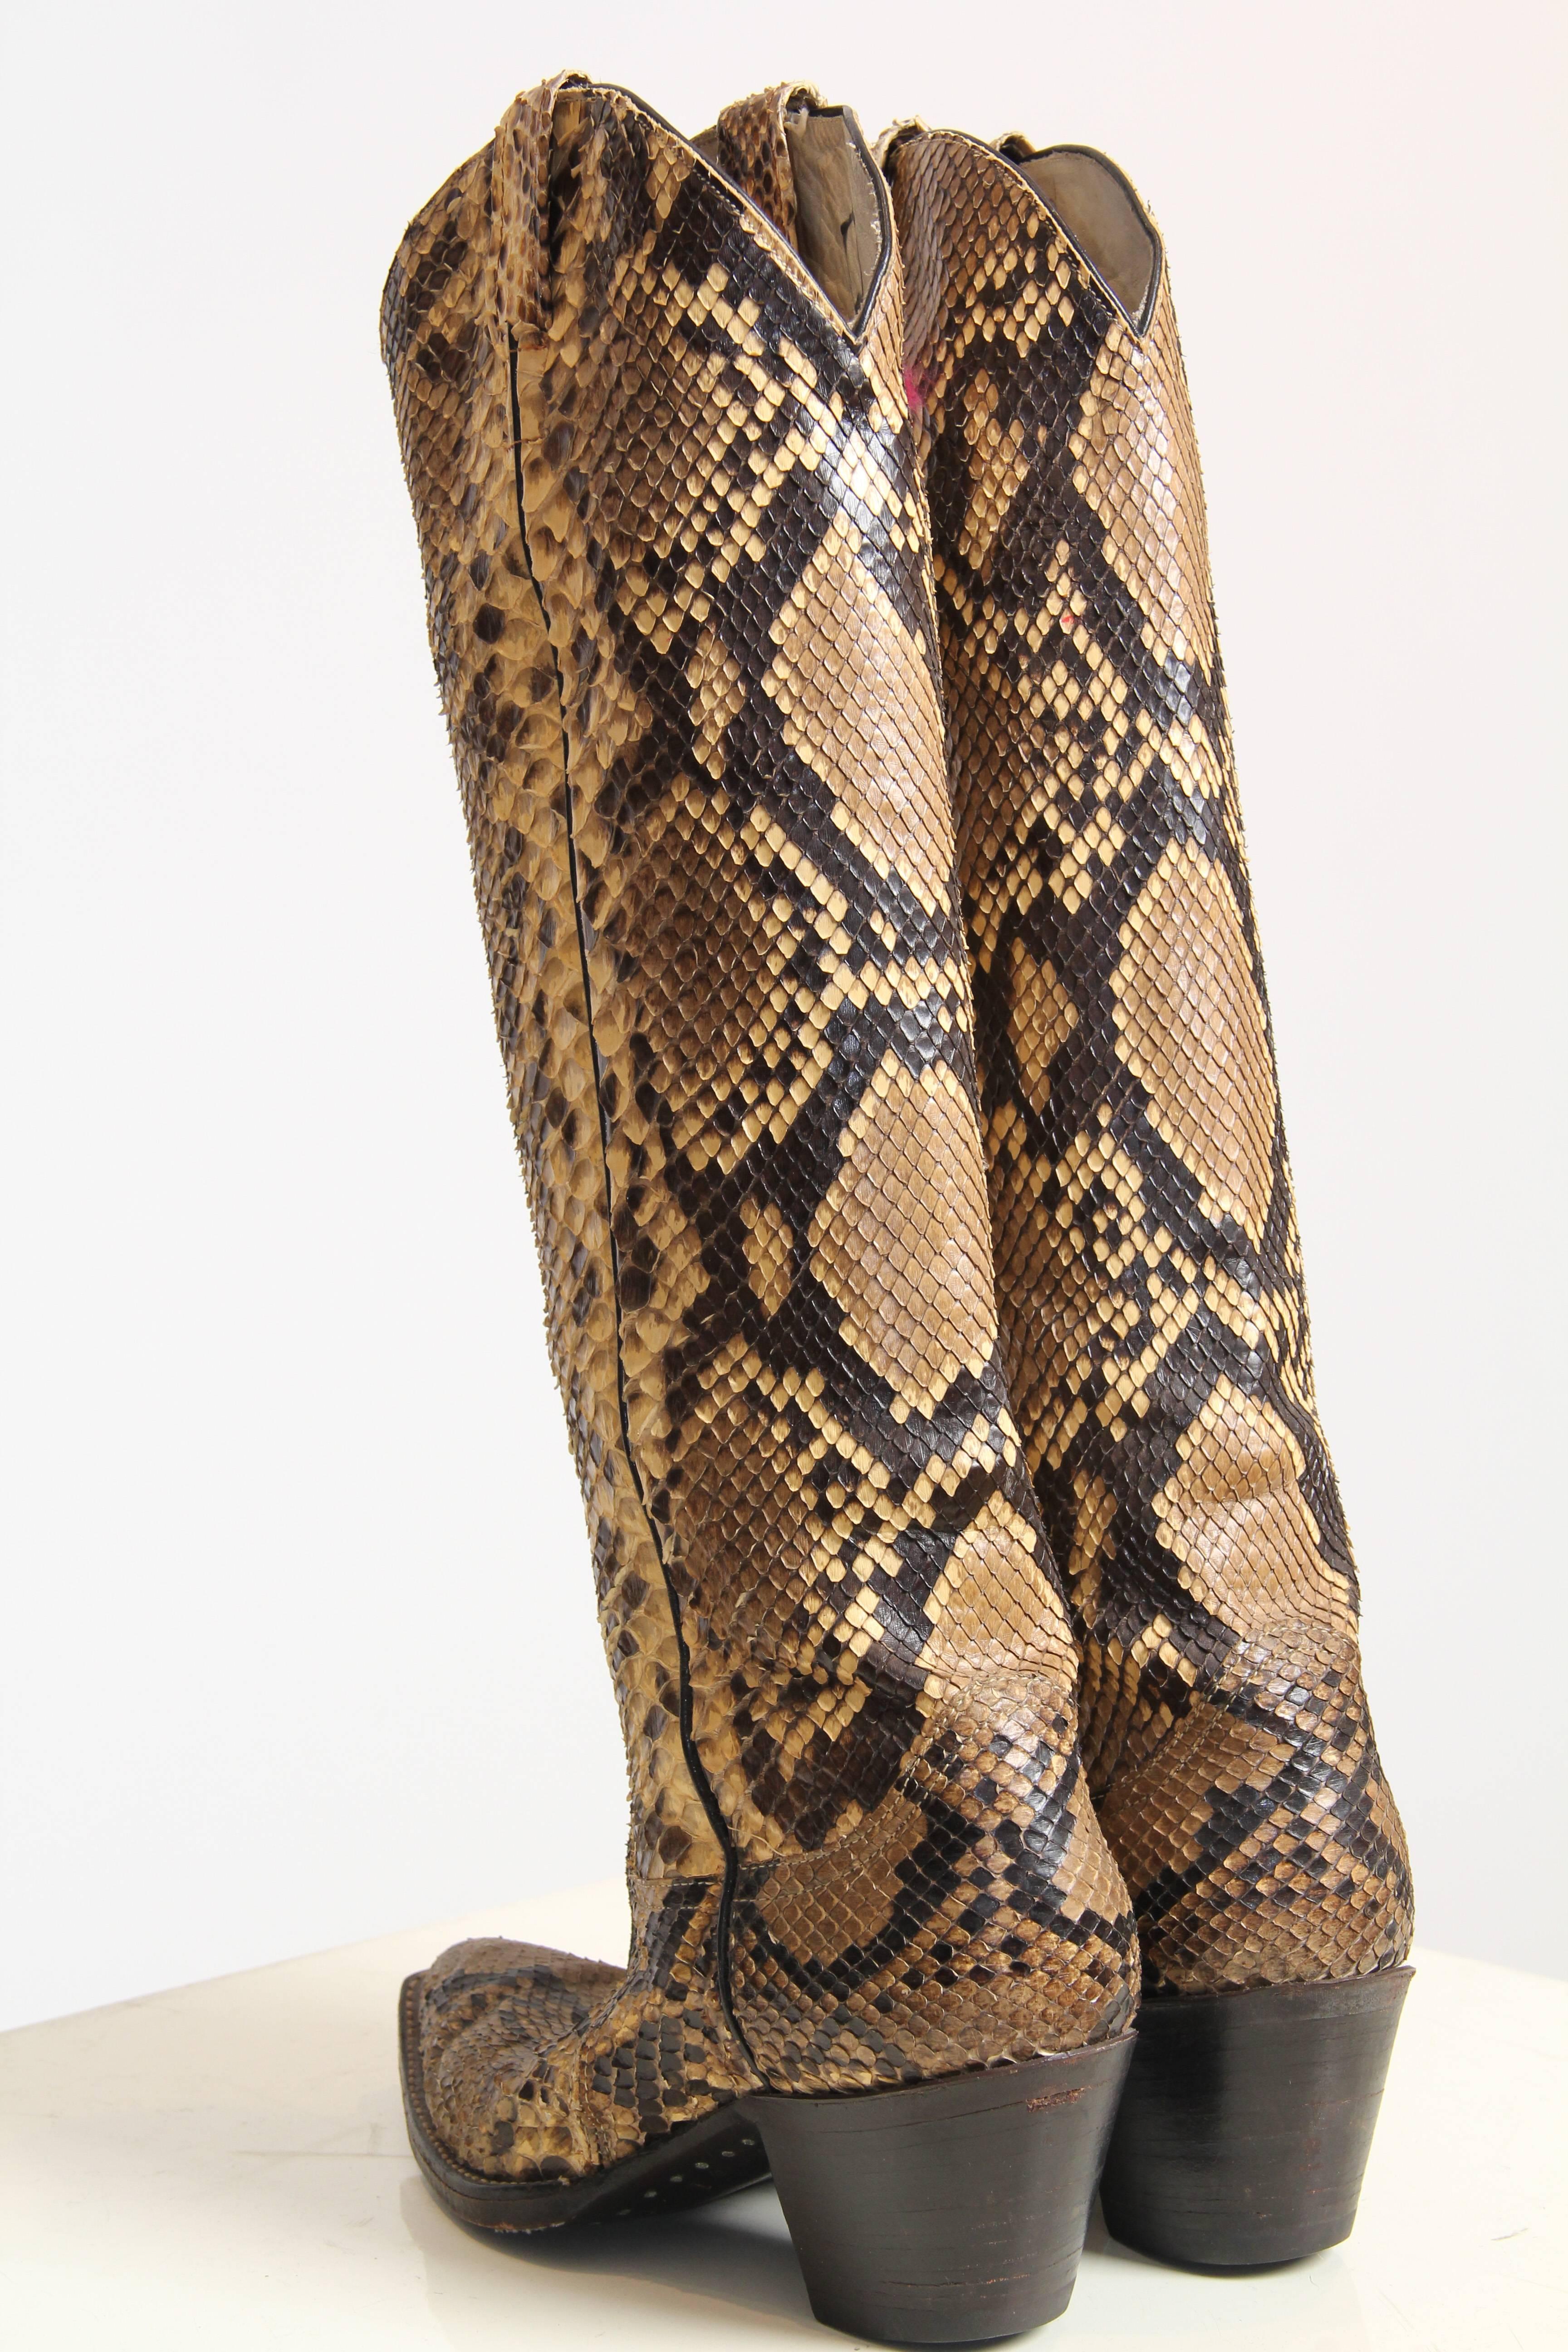 Women's Tall Snakeskin Cowboy Boots from Larry Mahan